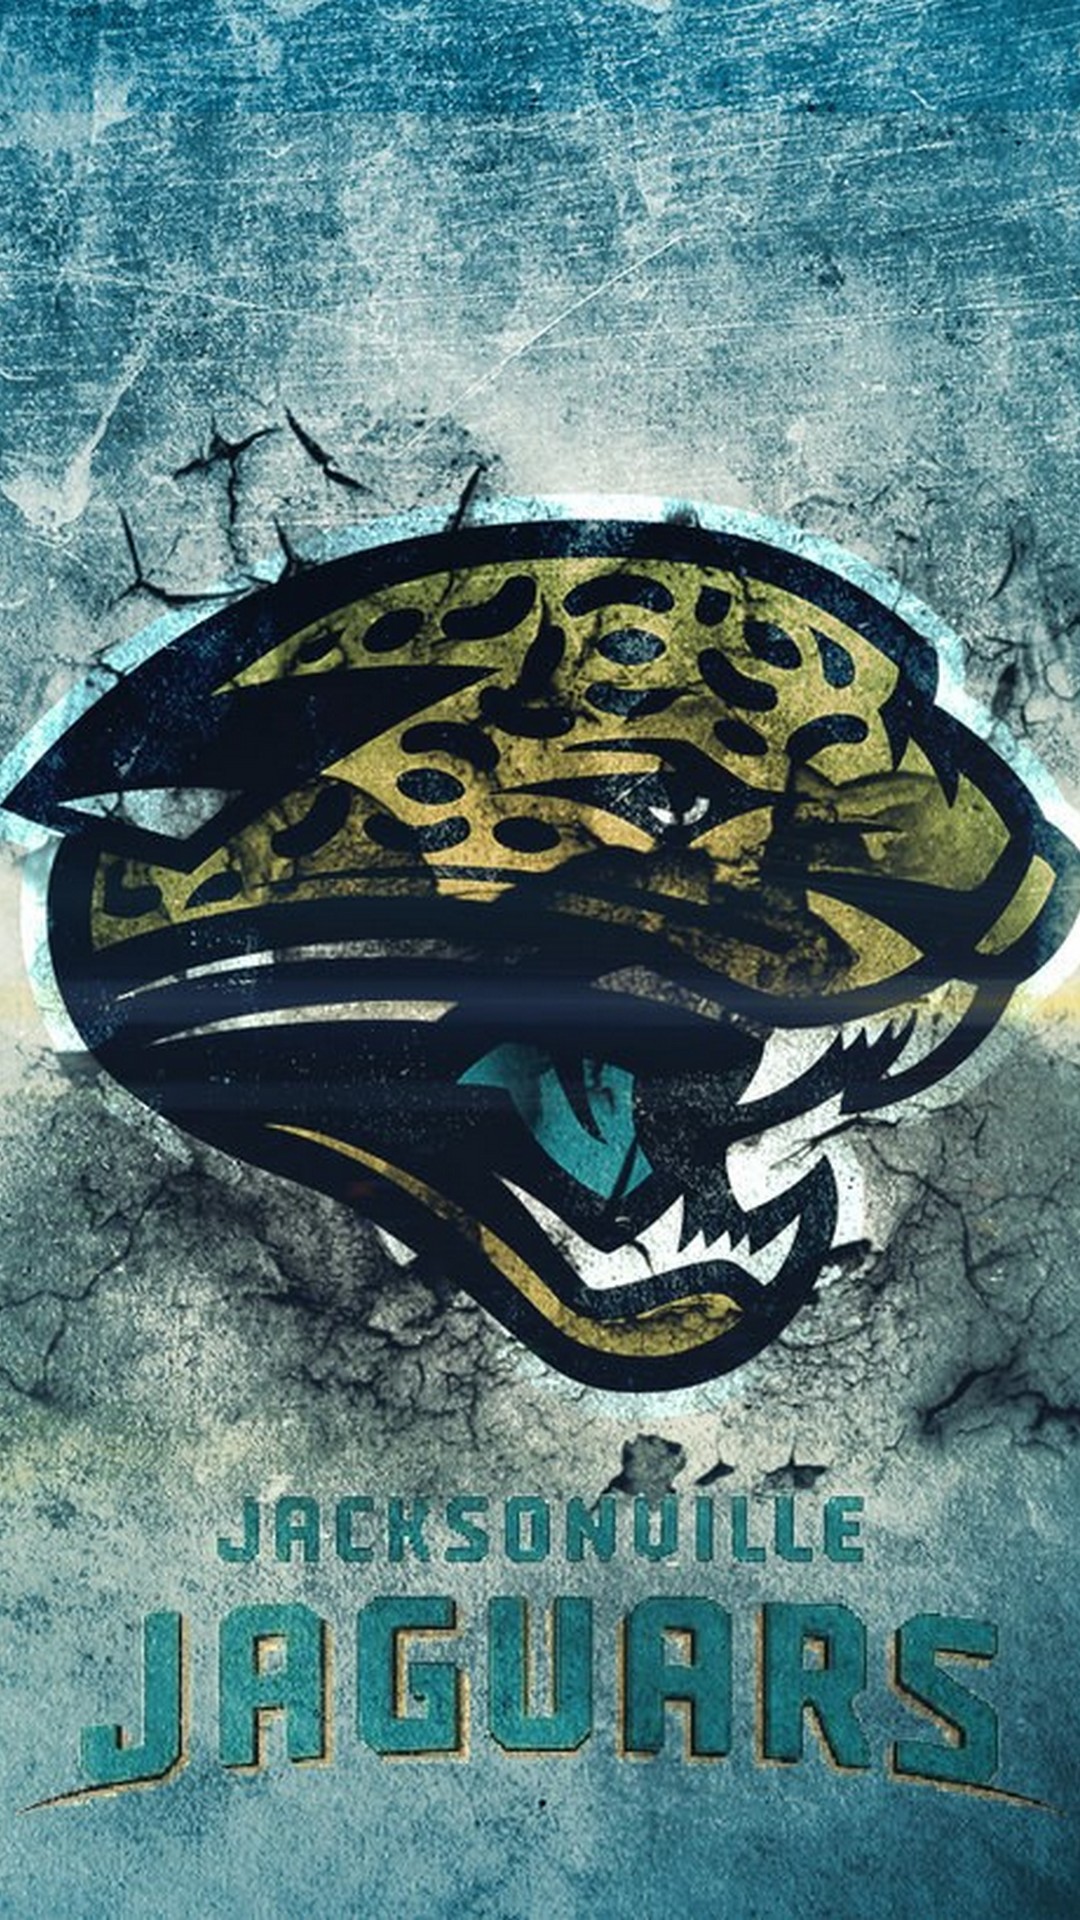 Jacksonville Jaguars iPhone Wallpaper with high-resolution 1080x1920 pixel. Download and set as wallpaper for Desktop Computer, Apple iPhone X, XS Max, XR, 8, 7, 6, SE, iPad, Android